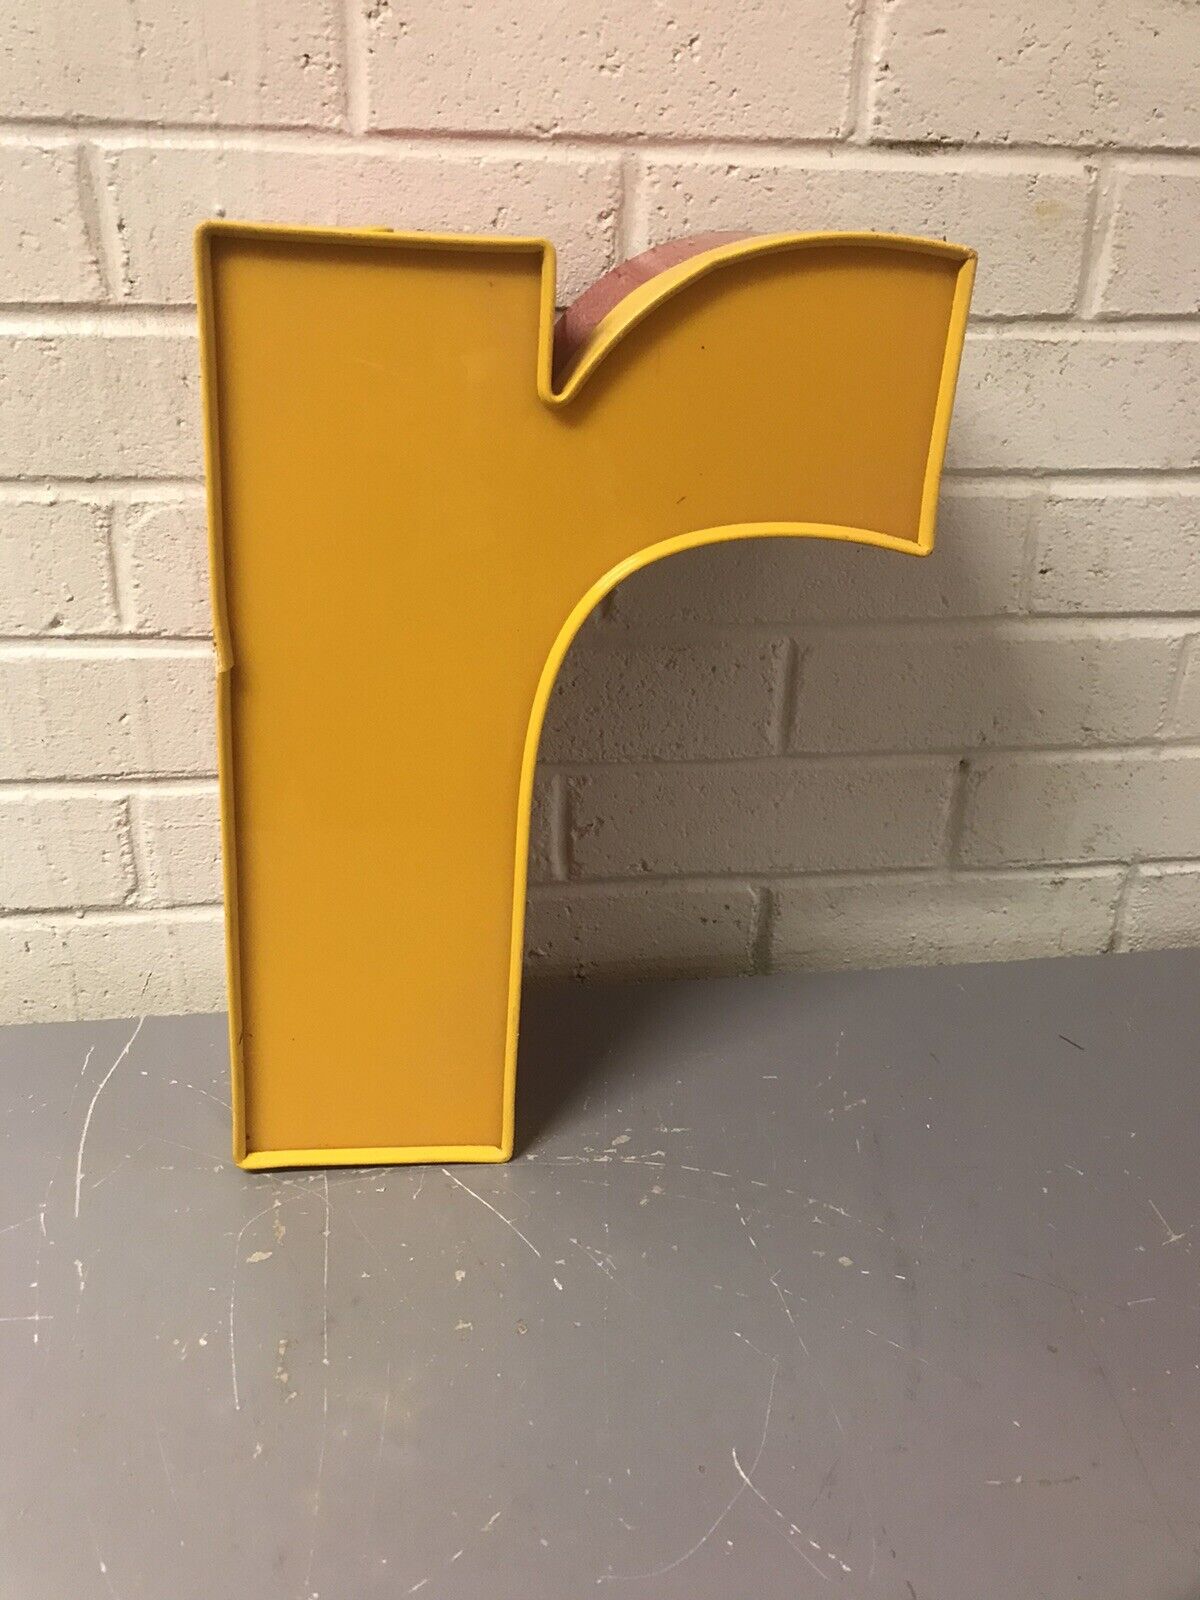 VINTAGE YELLOW RED NEON LOWER CASE LETTER Rr 15” TALL X 9 3/4 X 5 1/4” DEEP